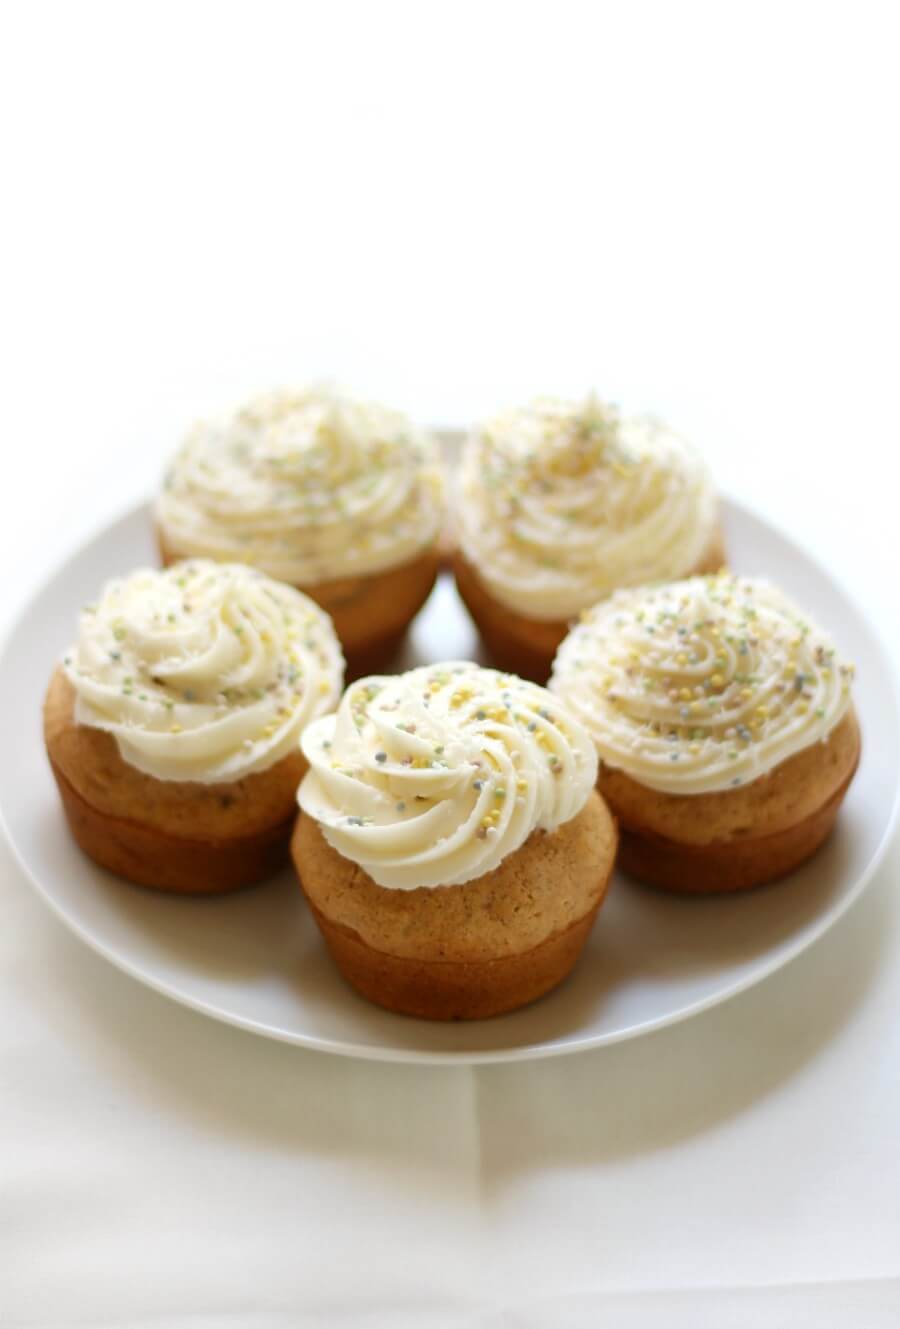 full plate of vegan cream cheese frosted gluten-free carrot cake cupcakes